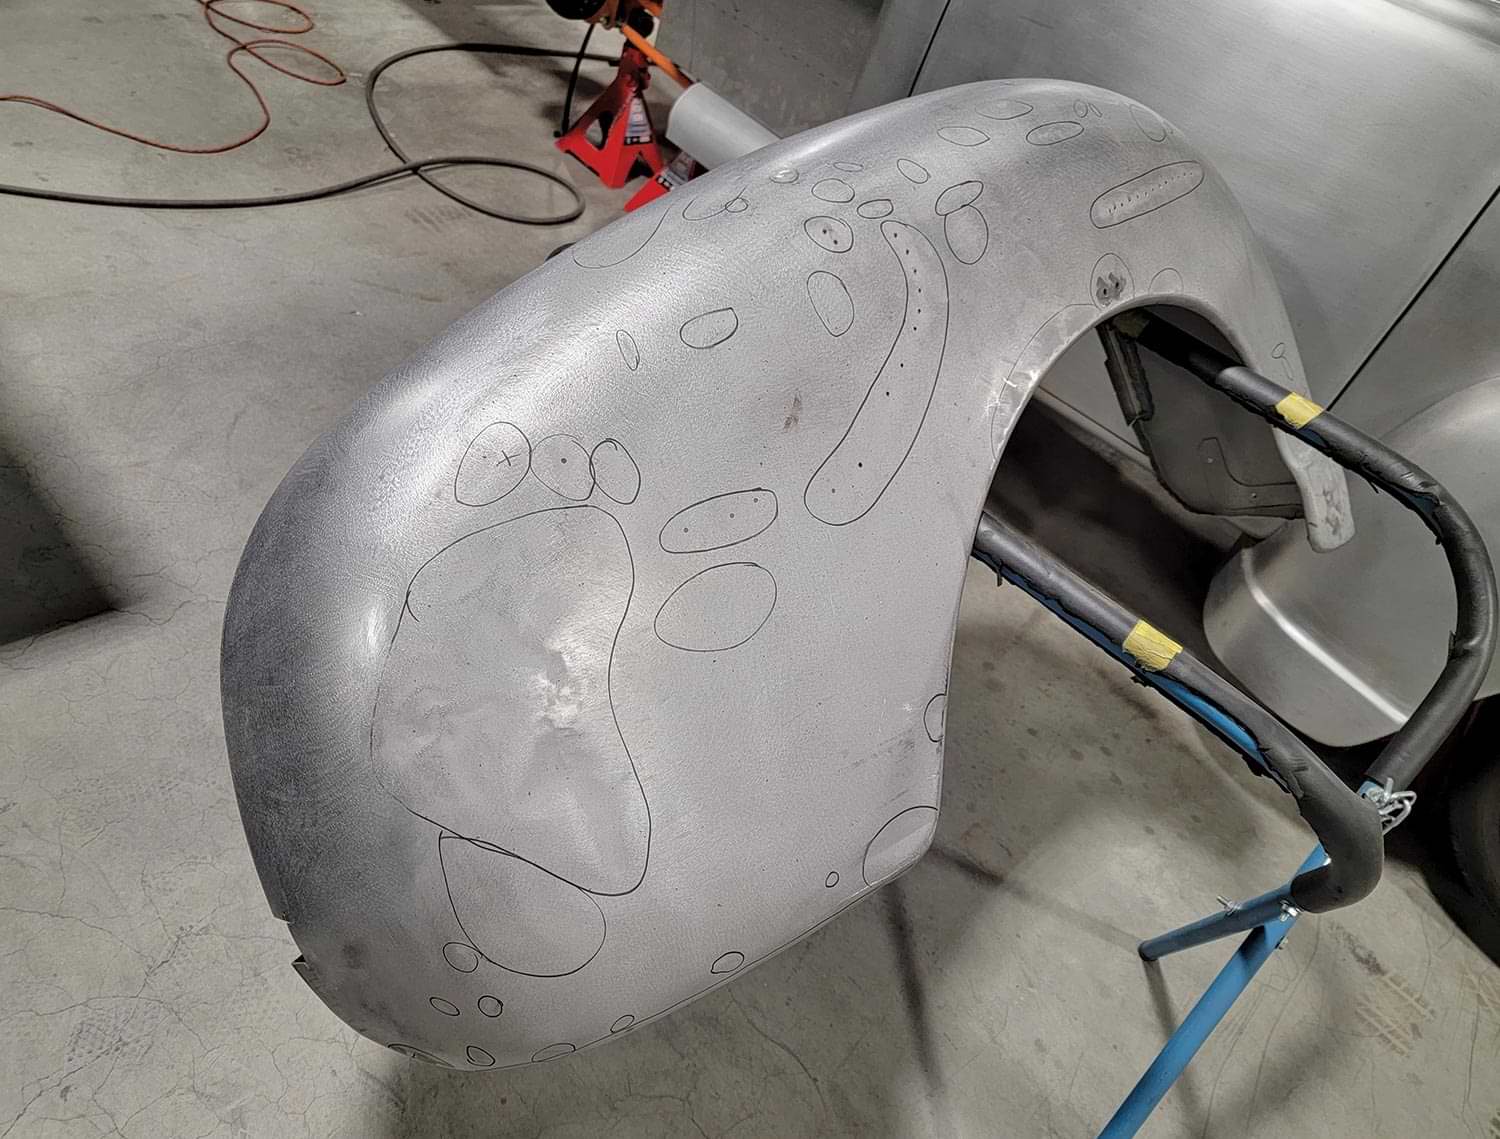 the passenger side back fender with markings indicating areas of needed metalwork